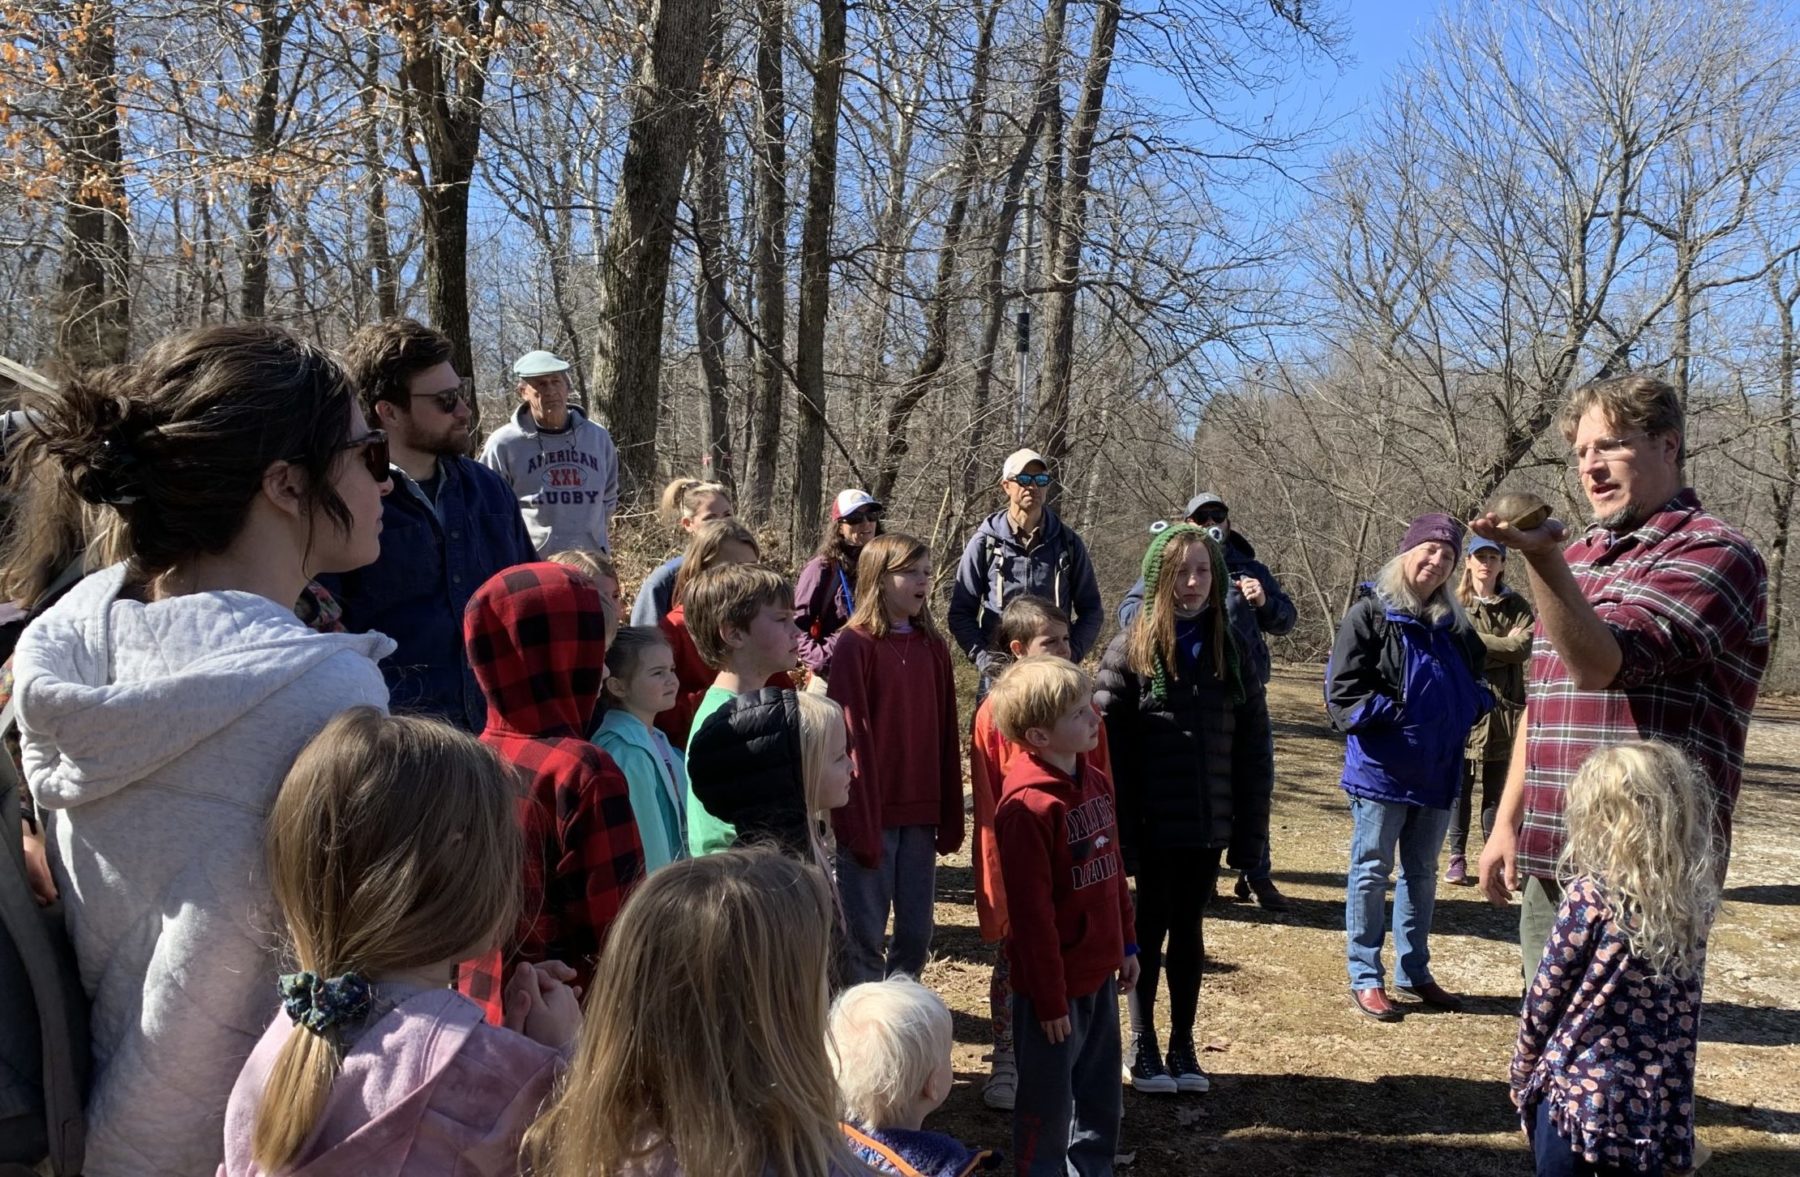 Outdoors under bare winter trees, a man in a flannel shirt holds out a turtle in an open hand to a gathering of kids and parents